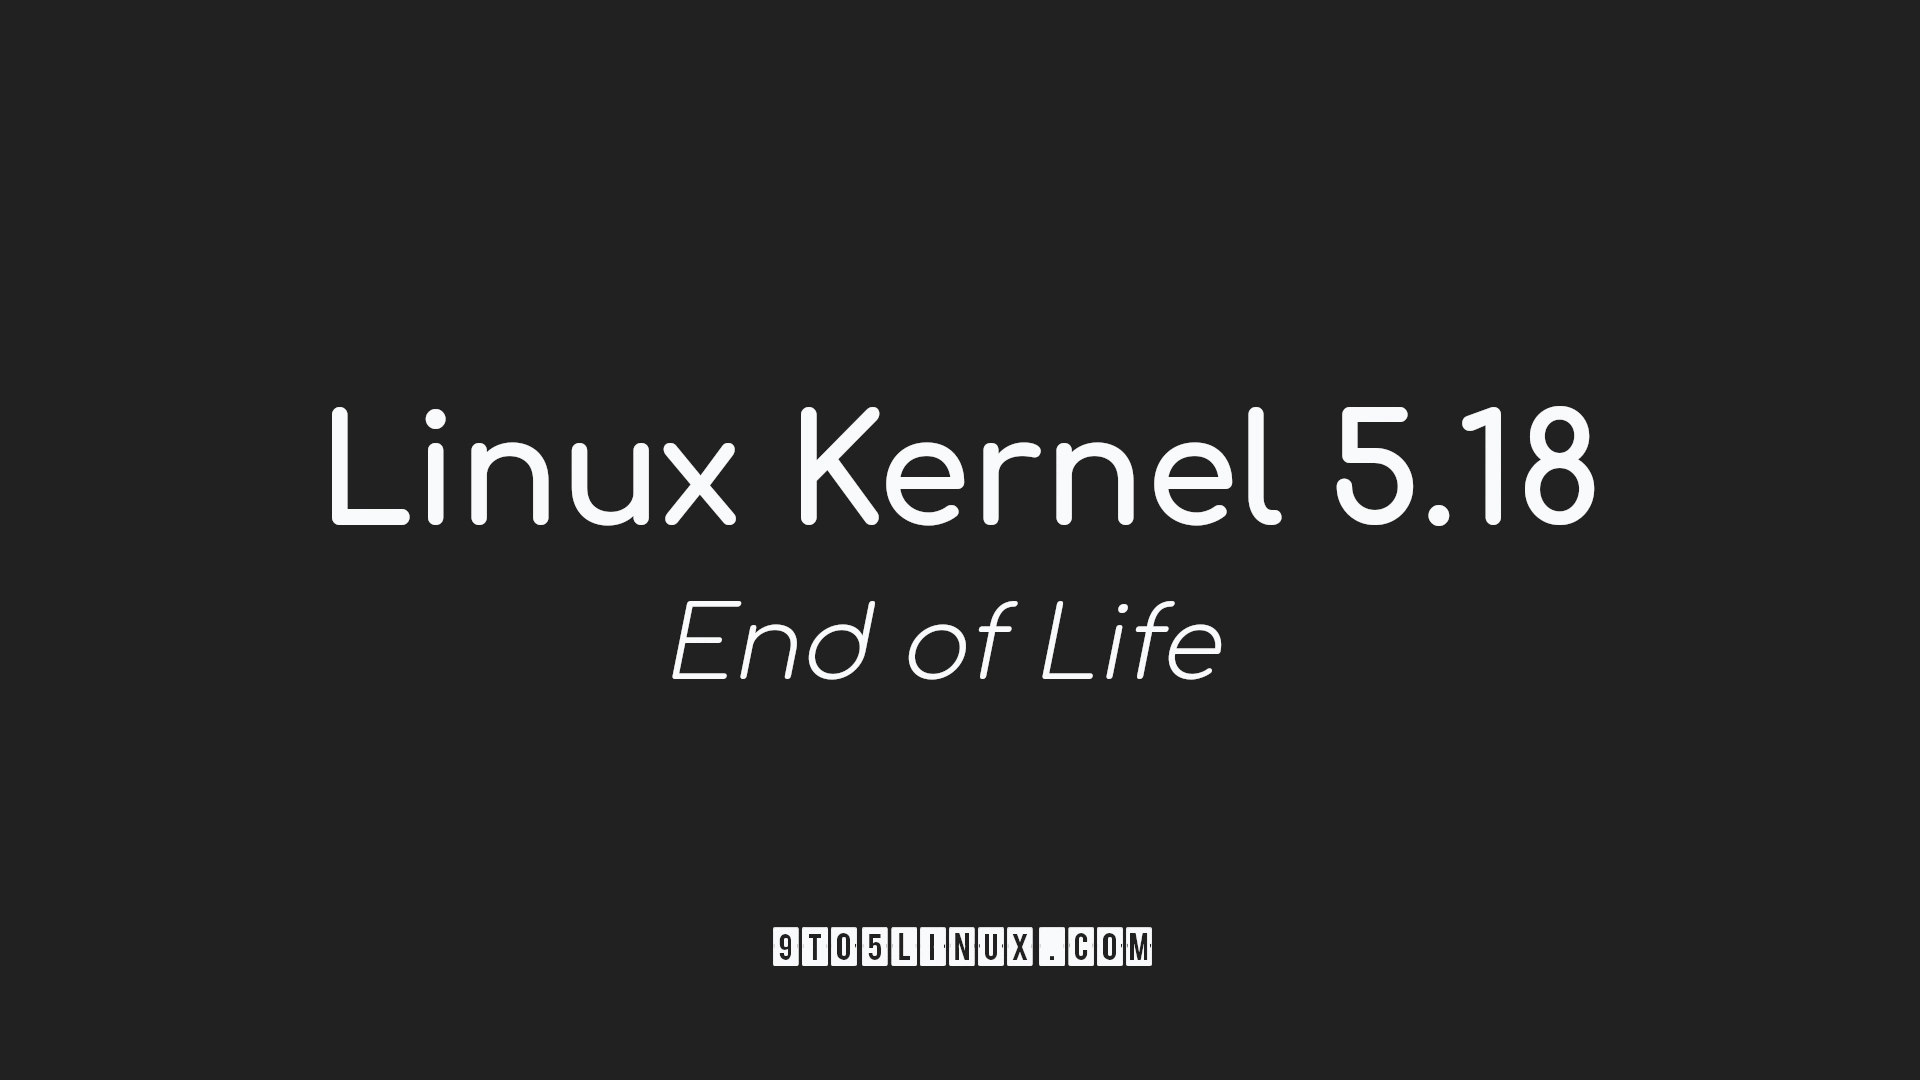 Linux Kernel 5.18 Reaches End of Life, Users Urged to Upgrade to Linux Kernel 5.19